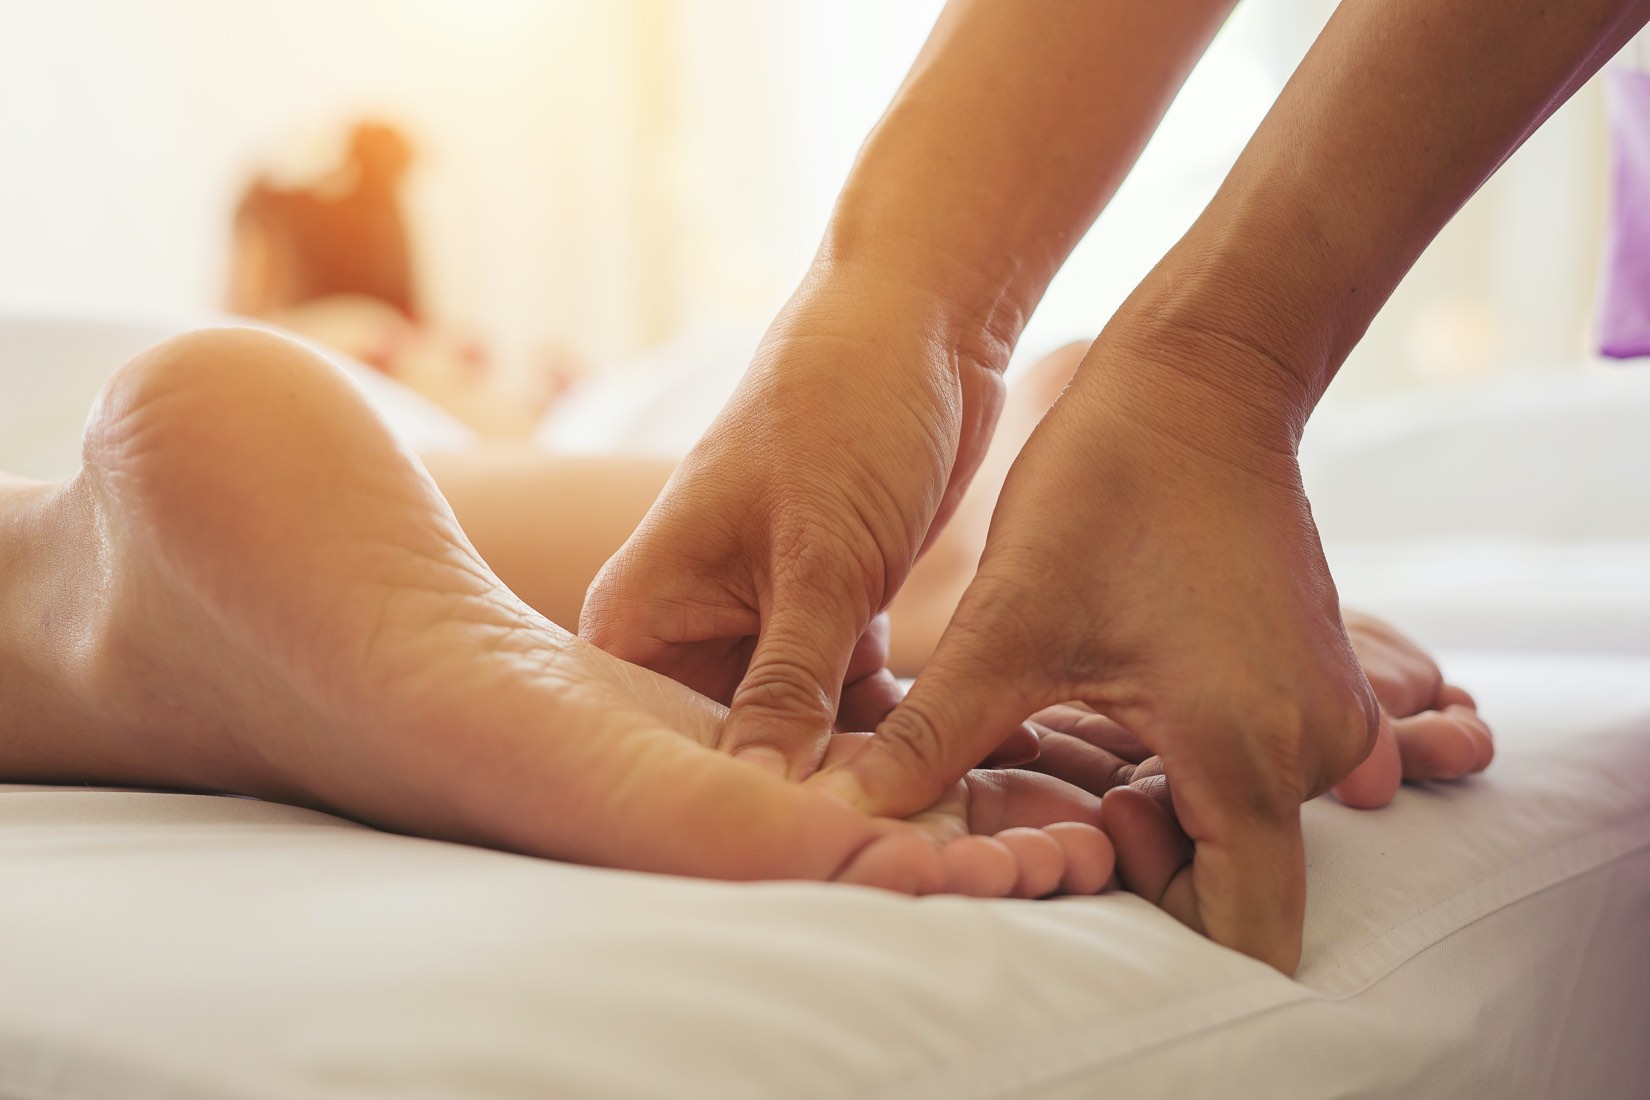 7 Best Tips For How To Give A Massage Like A Professional